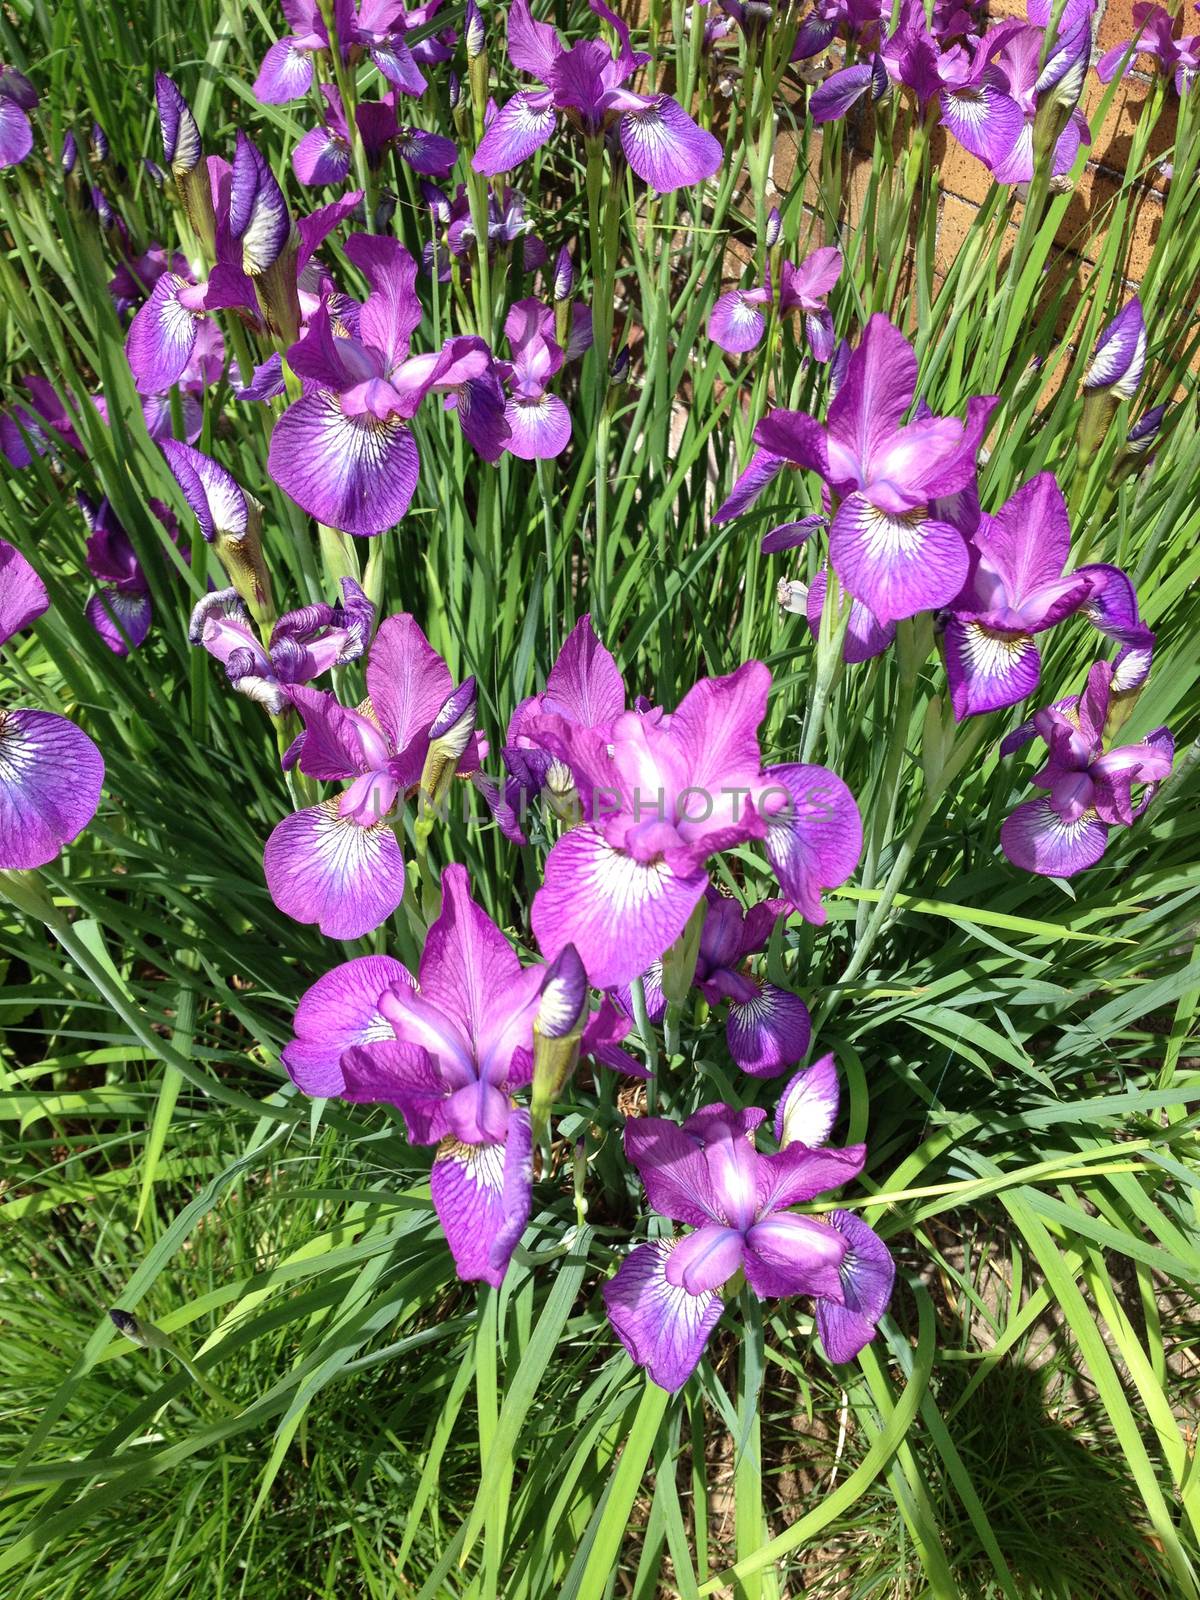 Purple Iris flowers in full bloom on the plant in nature